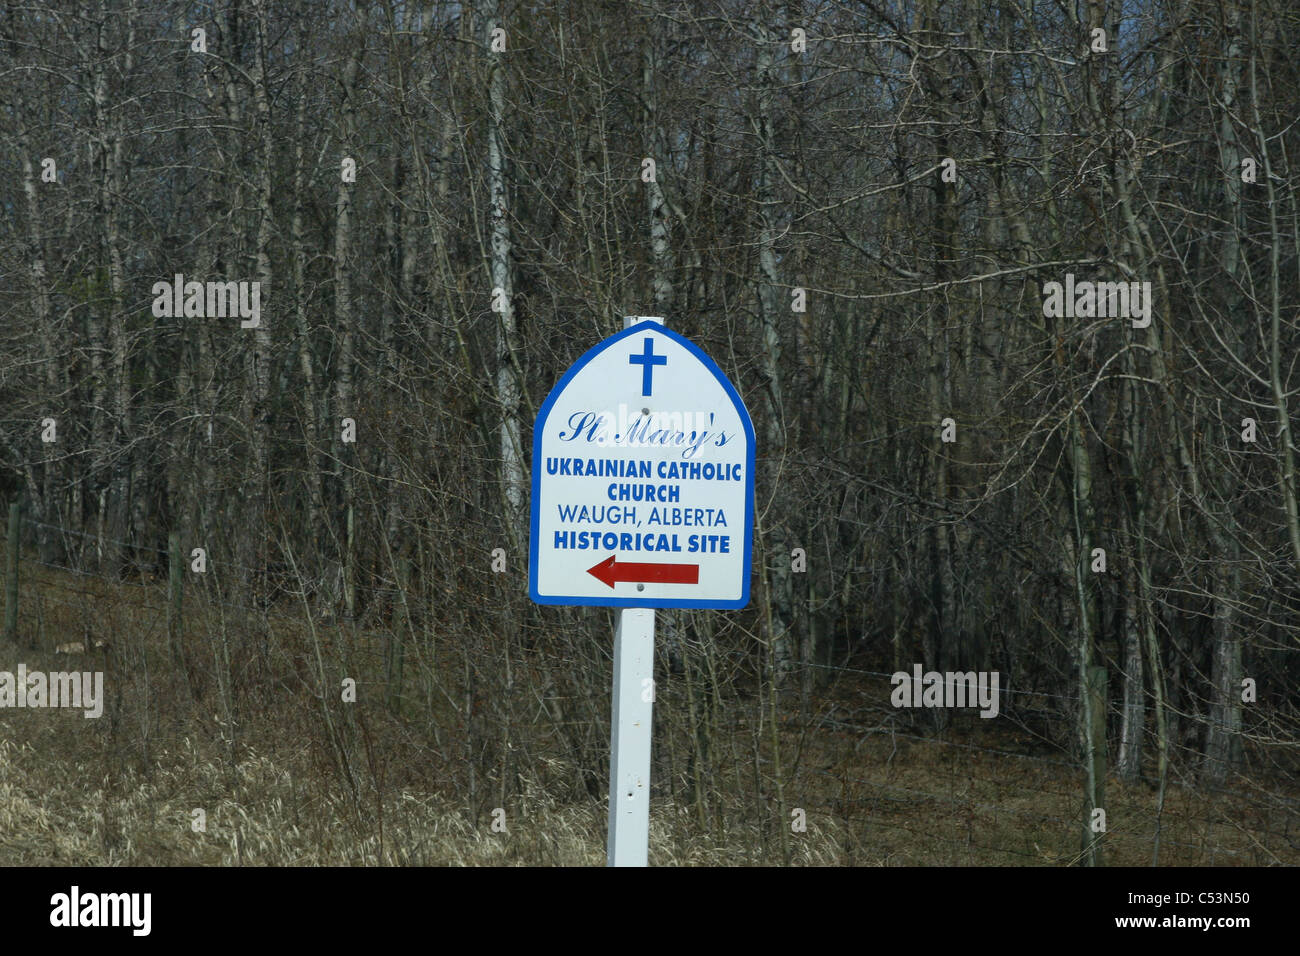 St. Mary's Ukrainian Catholic Church Waugh, Alberta, Canada historical site directional sign with red arrow Stock Photo